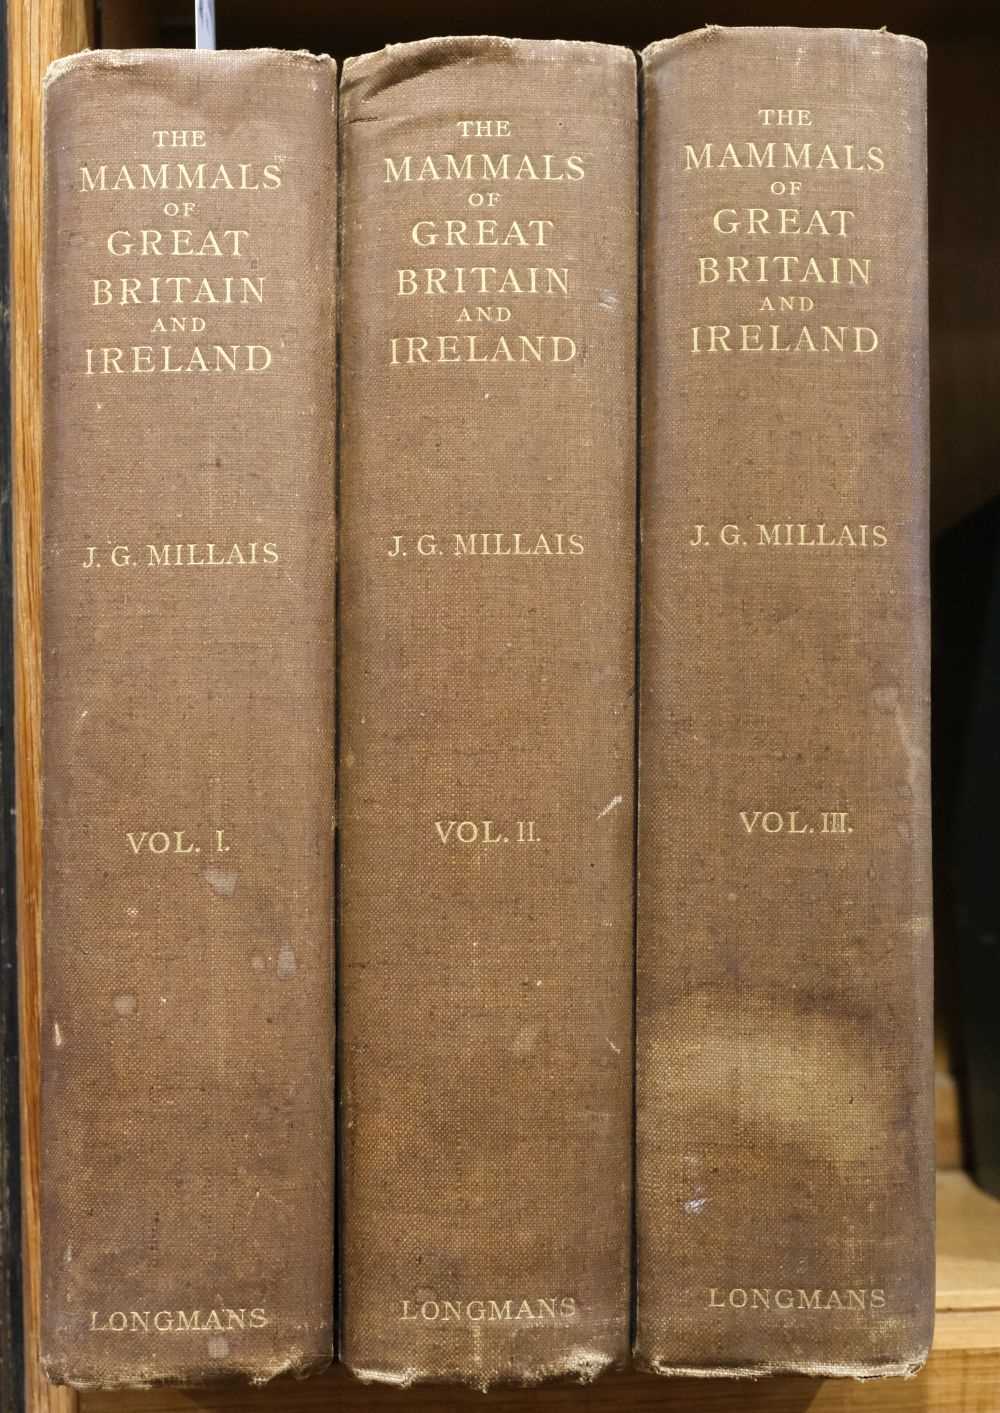 Lot 33 - Millais (John Guille). The Mammals of Great Britain and Ireland, 3 vol., limited edition, 1904.